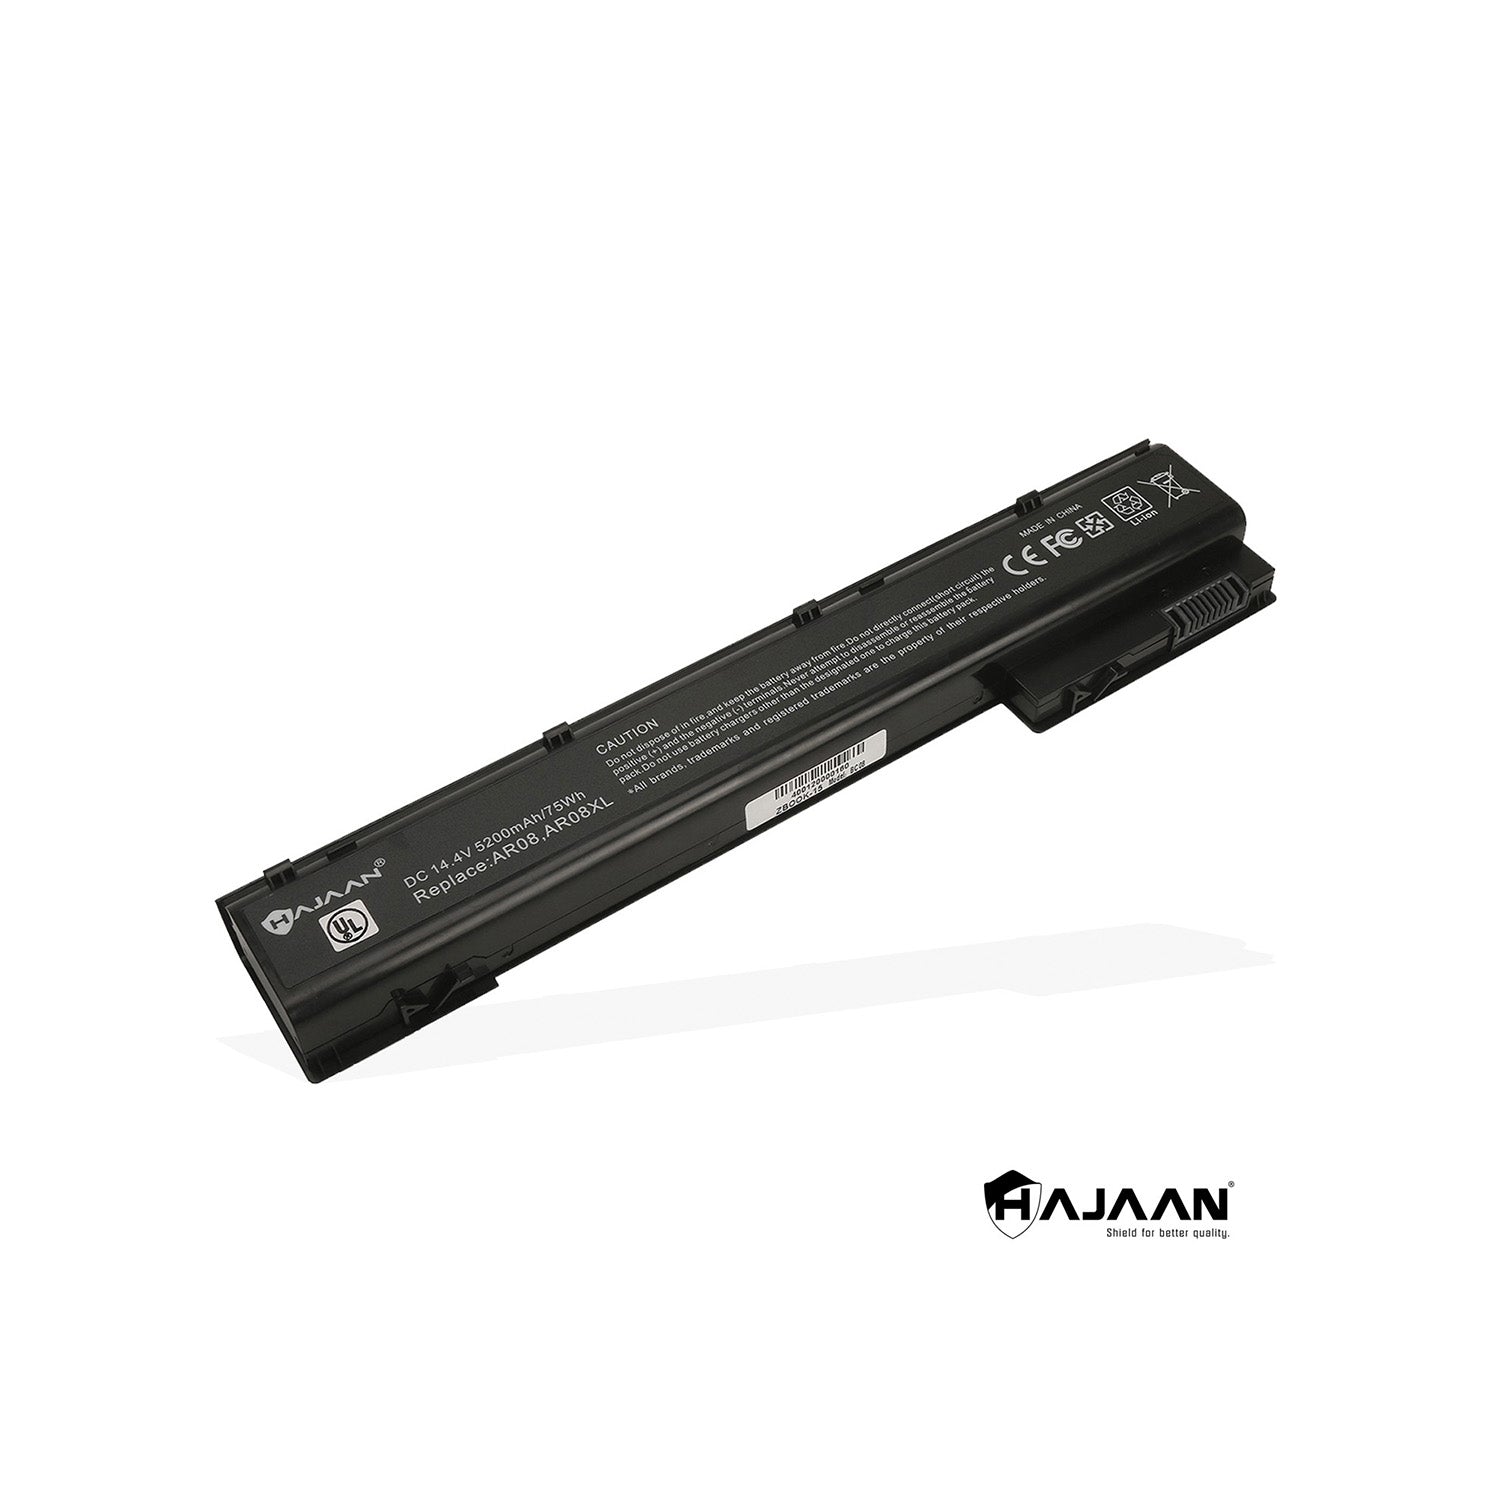 HAJAAN New Laptop Battery for HP ZBook 15 G1/G2, ZBook 17 G1/G2, 707614-121, 707615-141, AR08, AR08XL, HSTNN-1B4H, HSTNN-1B4I ( Li-ion, 5200mAh/75Wh, 8-Cells,14.4 V) 1 Year Warranty